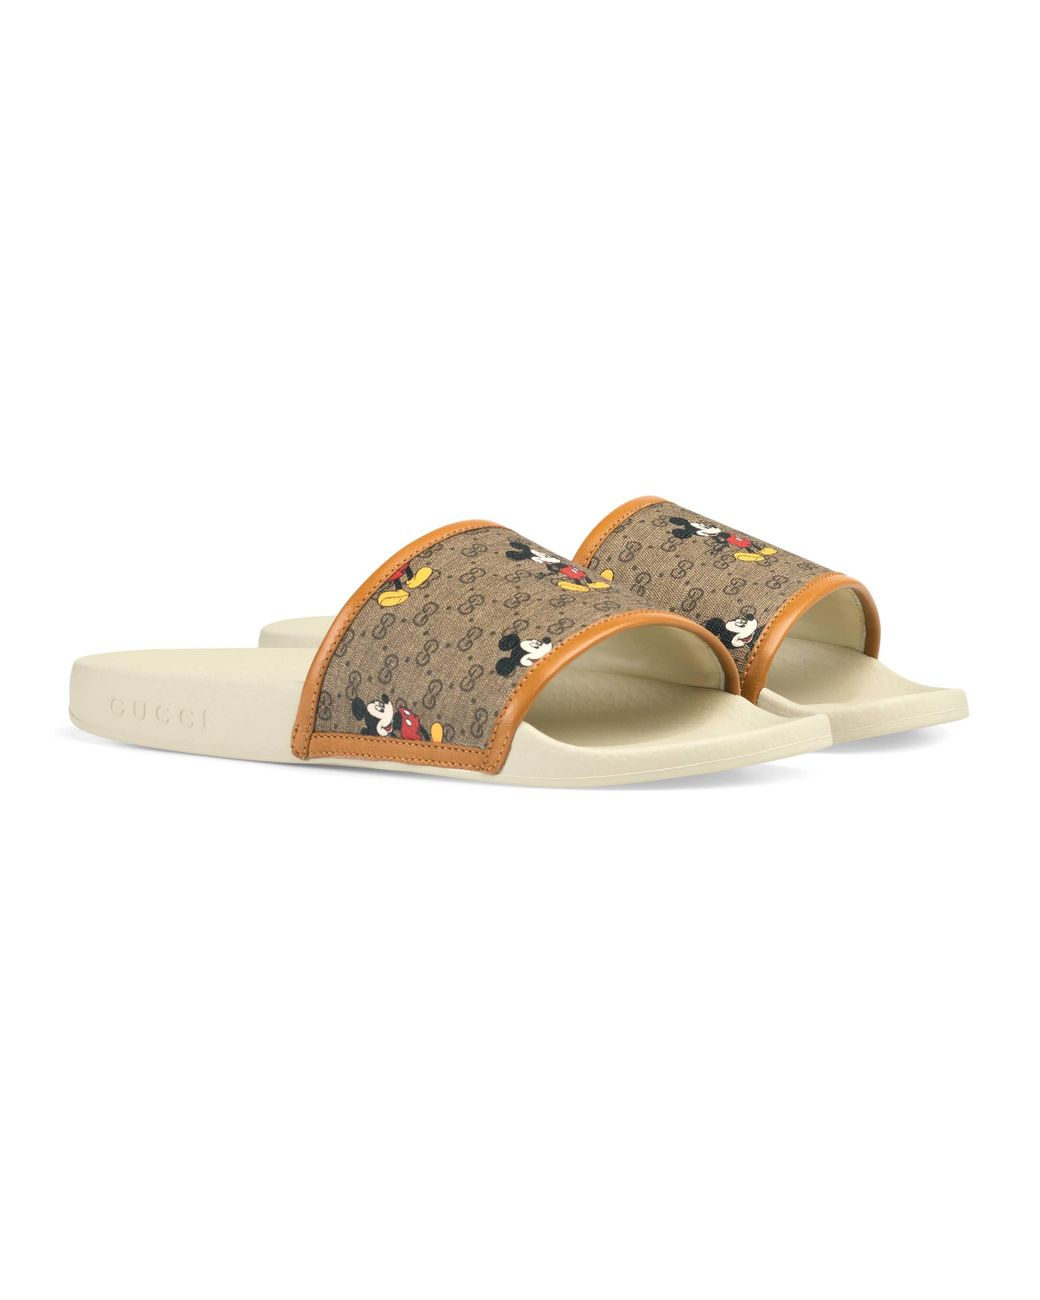 Gucci GG Disney X Slide in Natural | Lyst